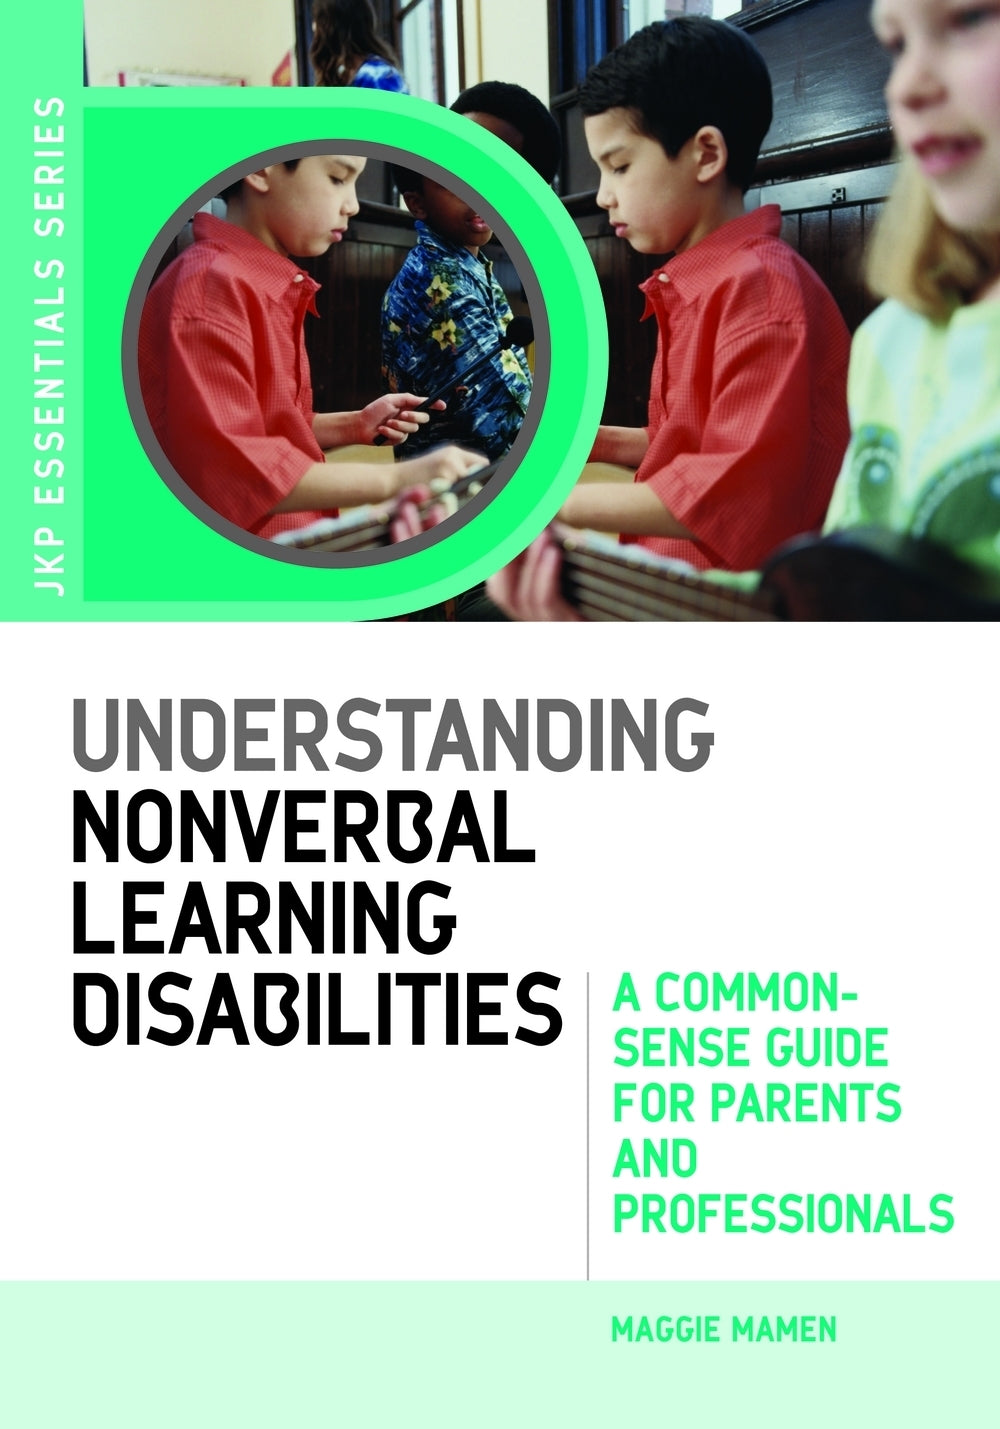 Understanding Nonverbal Learning Disabilities by Maggie Mamen